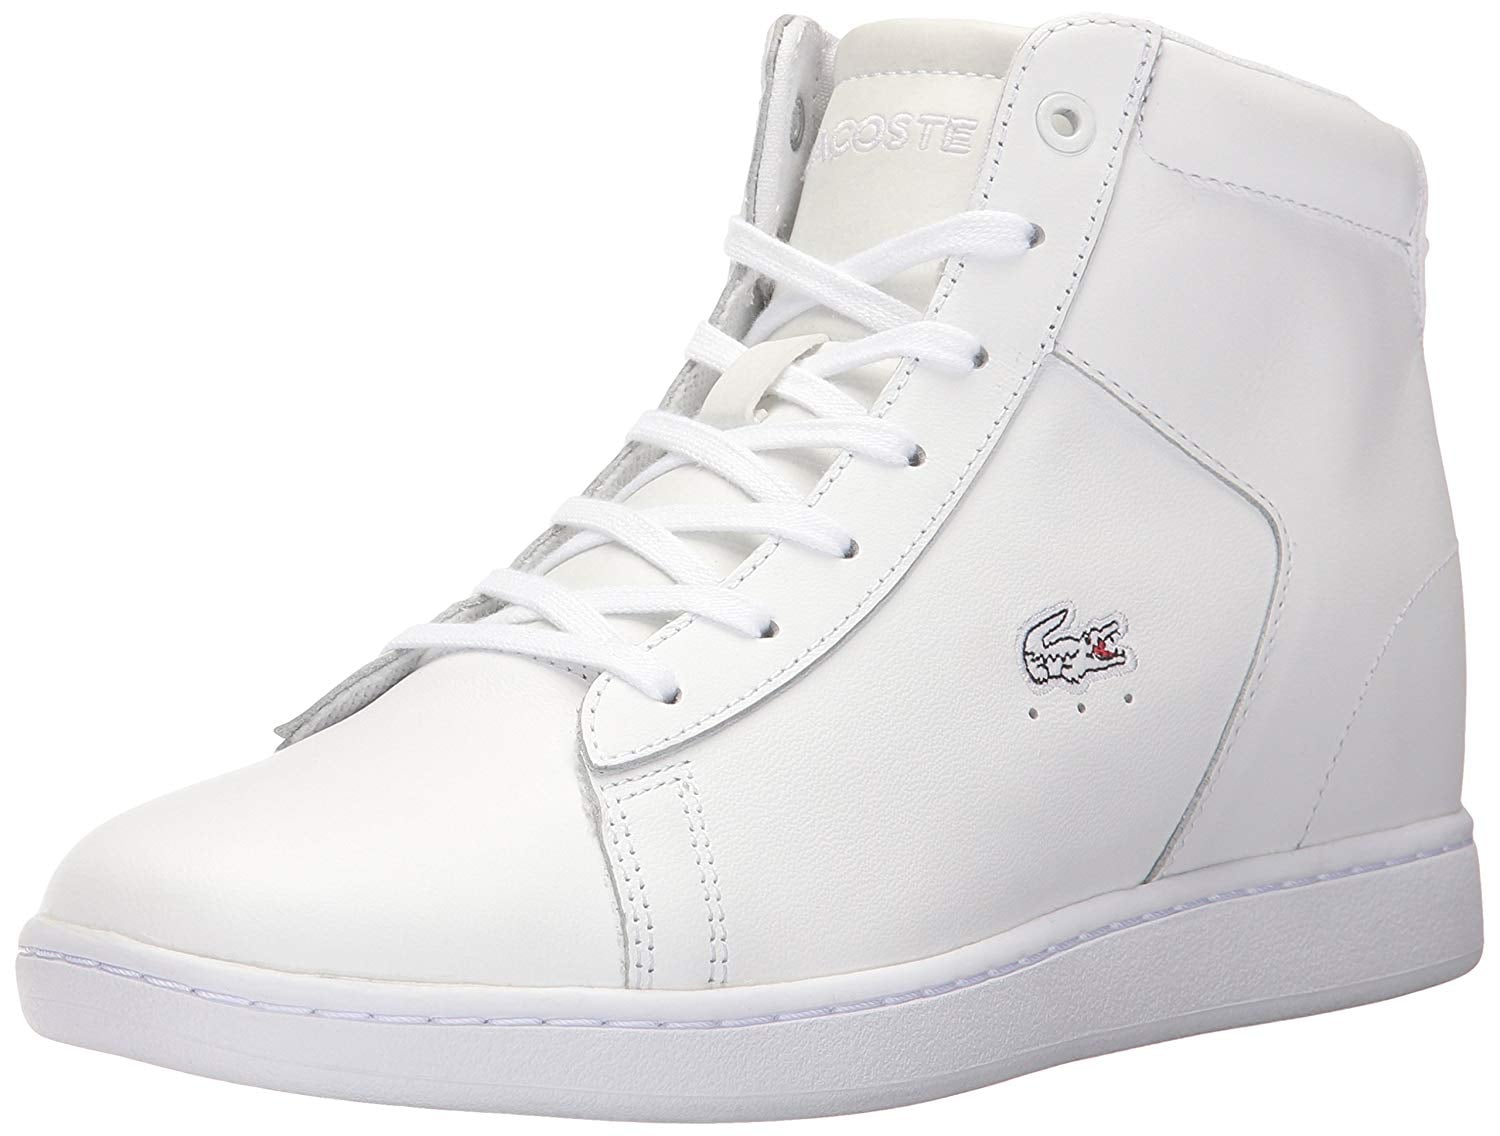 Lacoste Carnaby Evo Wedge High Top | Justin Bieber and Hailey Baldwin Look Cute, but It's Her Sneakers That Have Full Attention | POPSUGAR Fashion 5